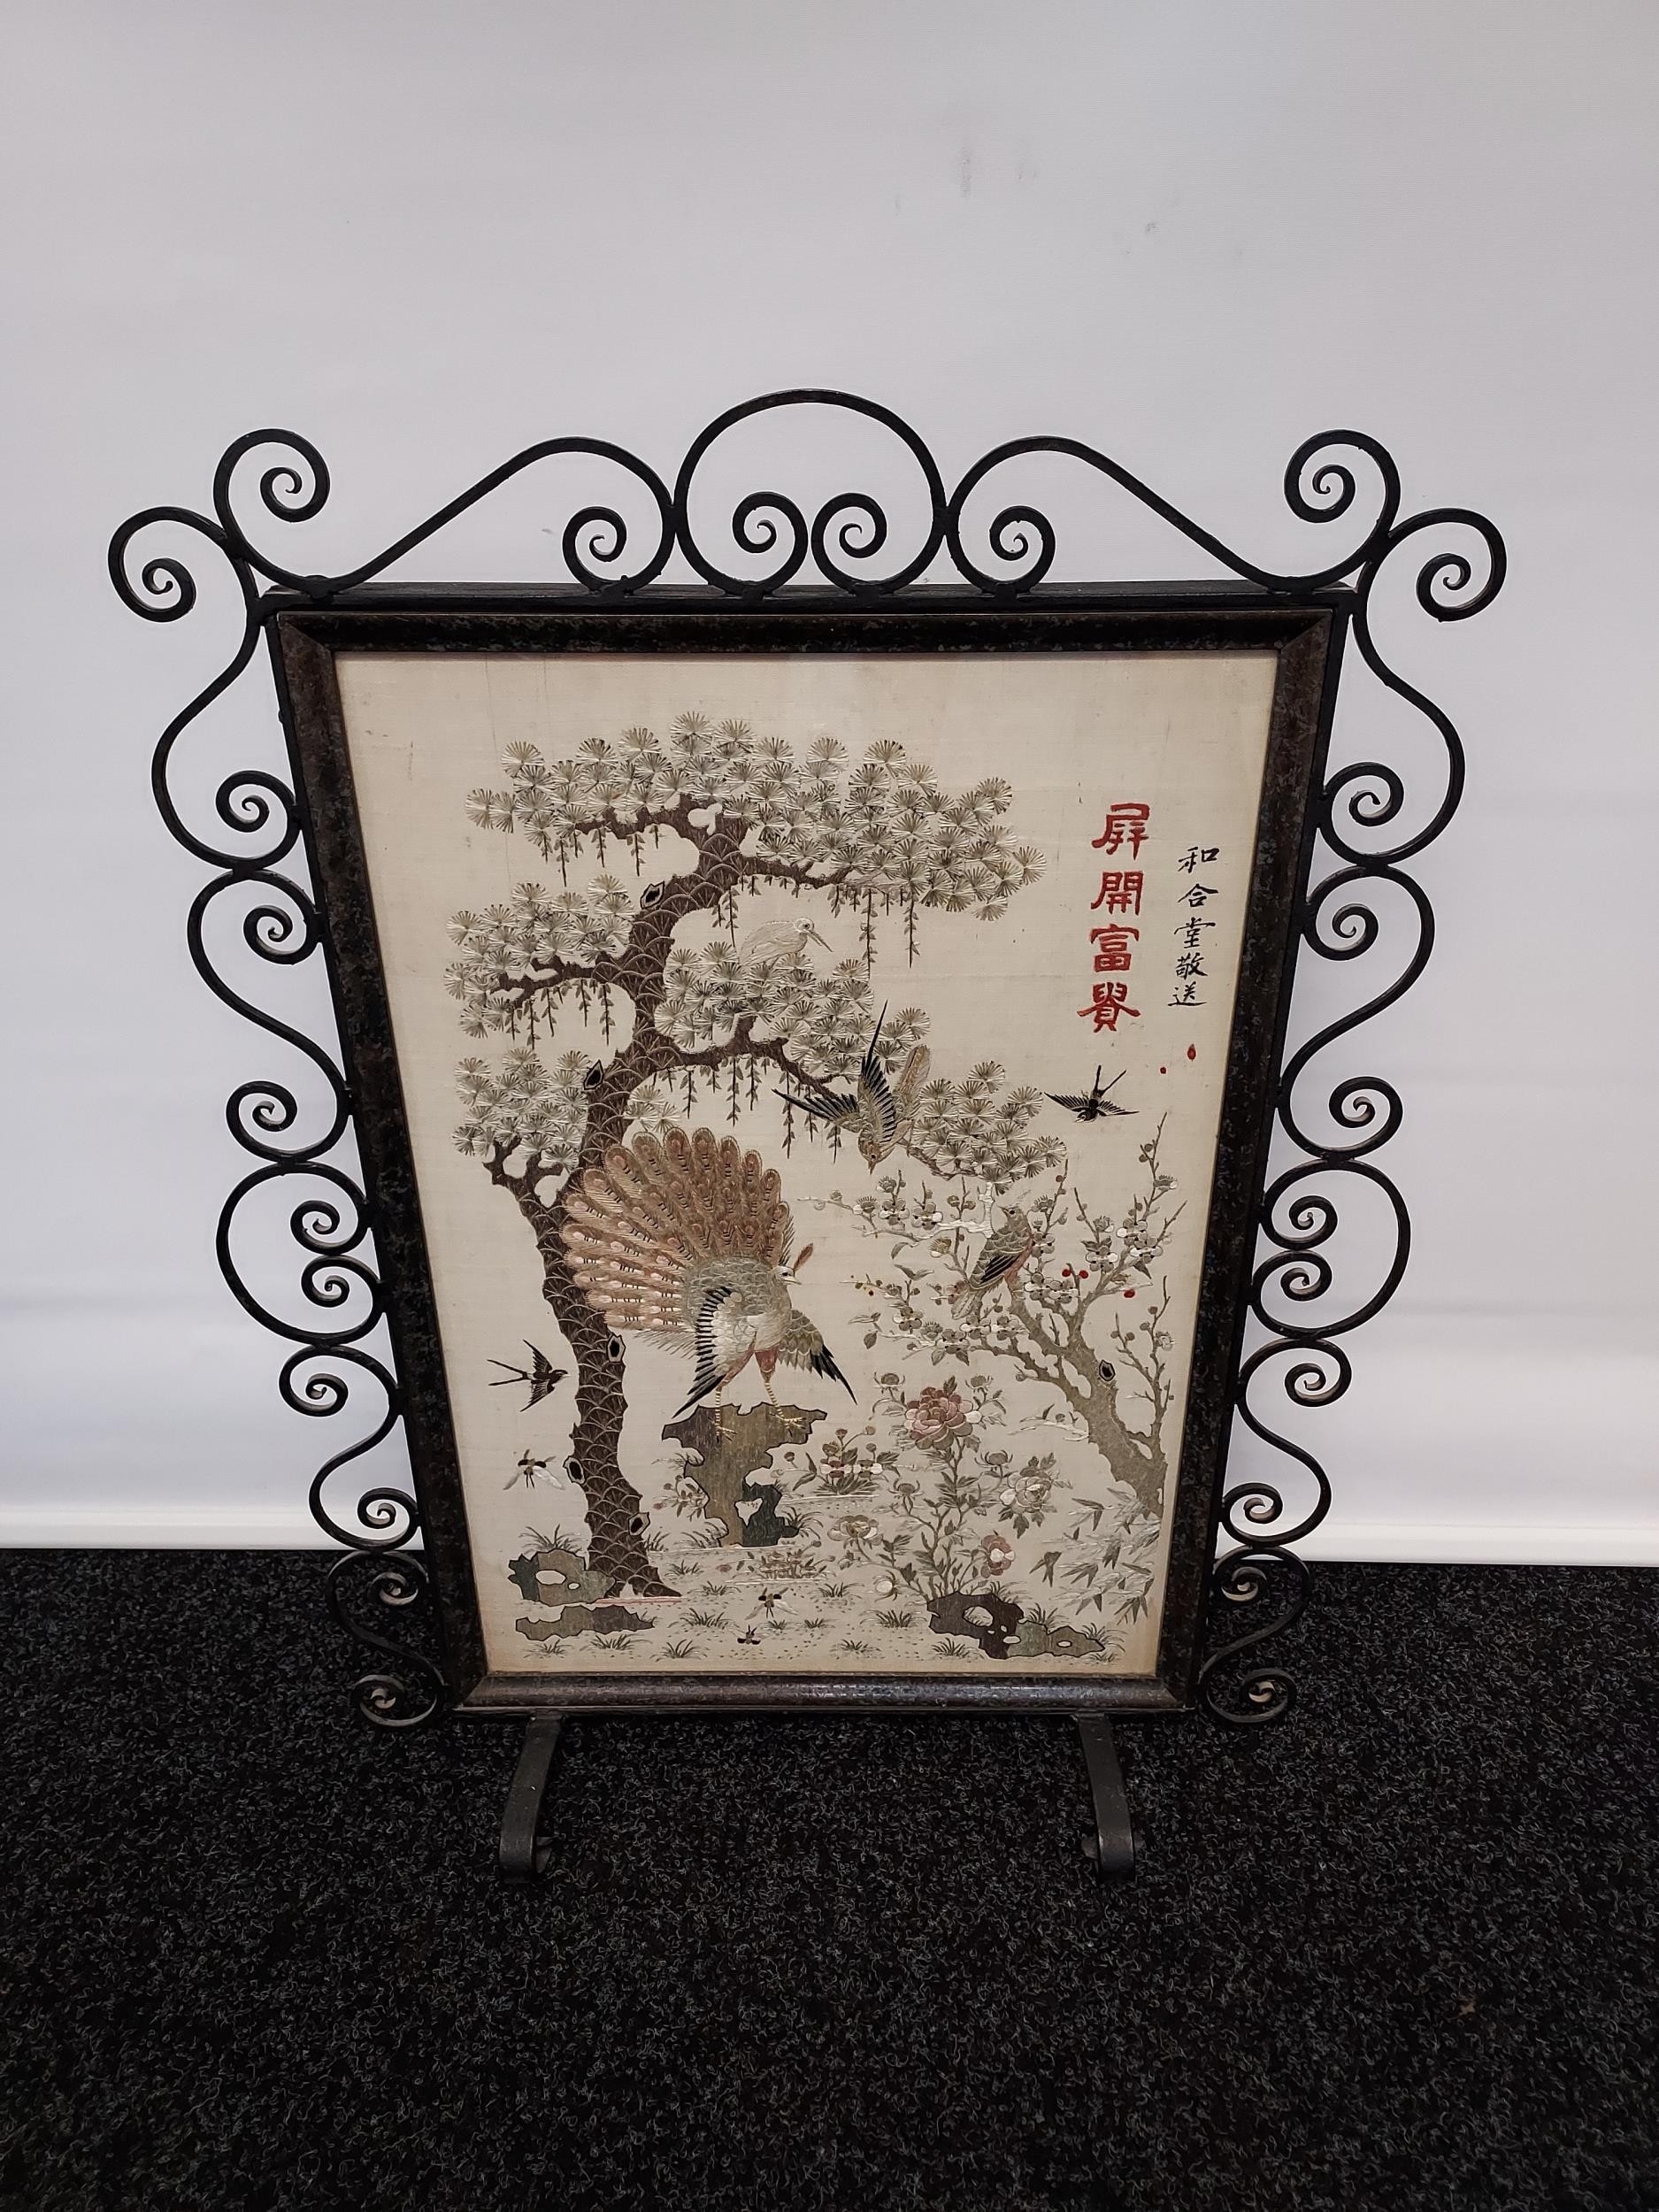 An 19th century Chinese/ Japanese silk tapestry depicting various bird flying and perched. Signed by